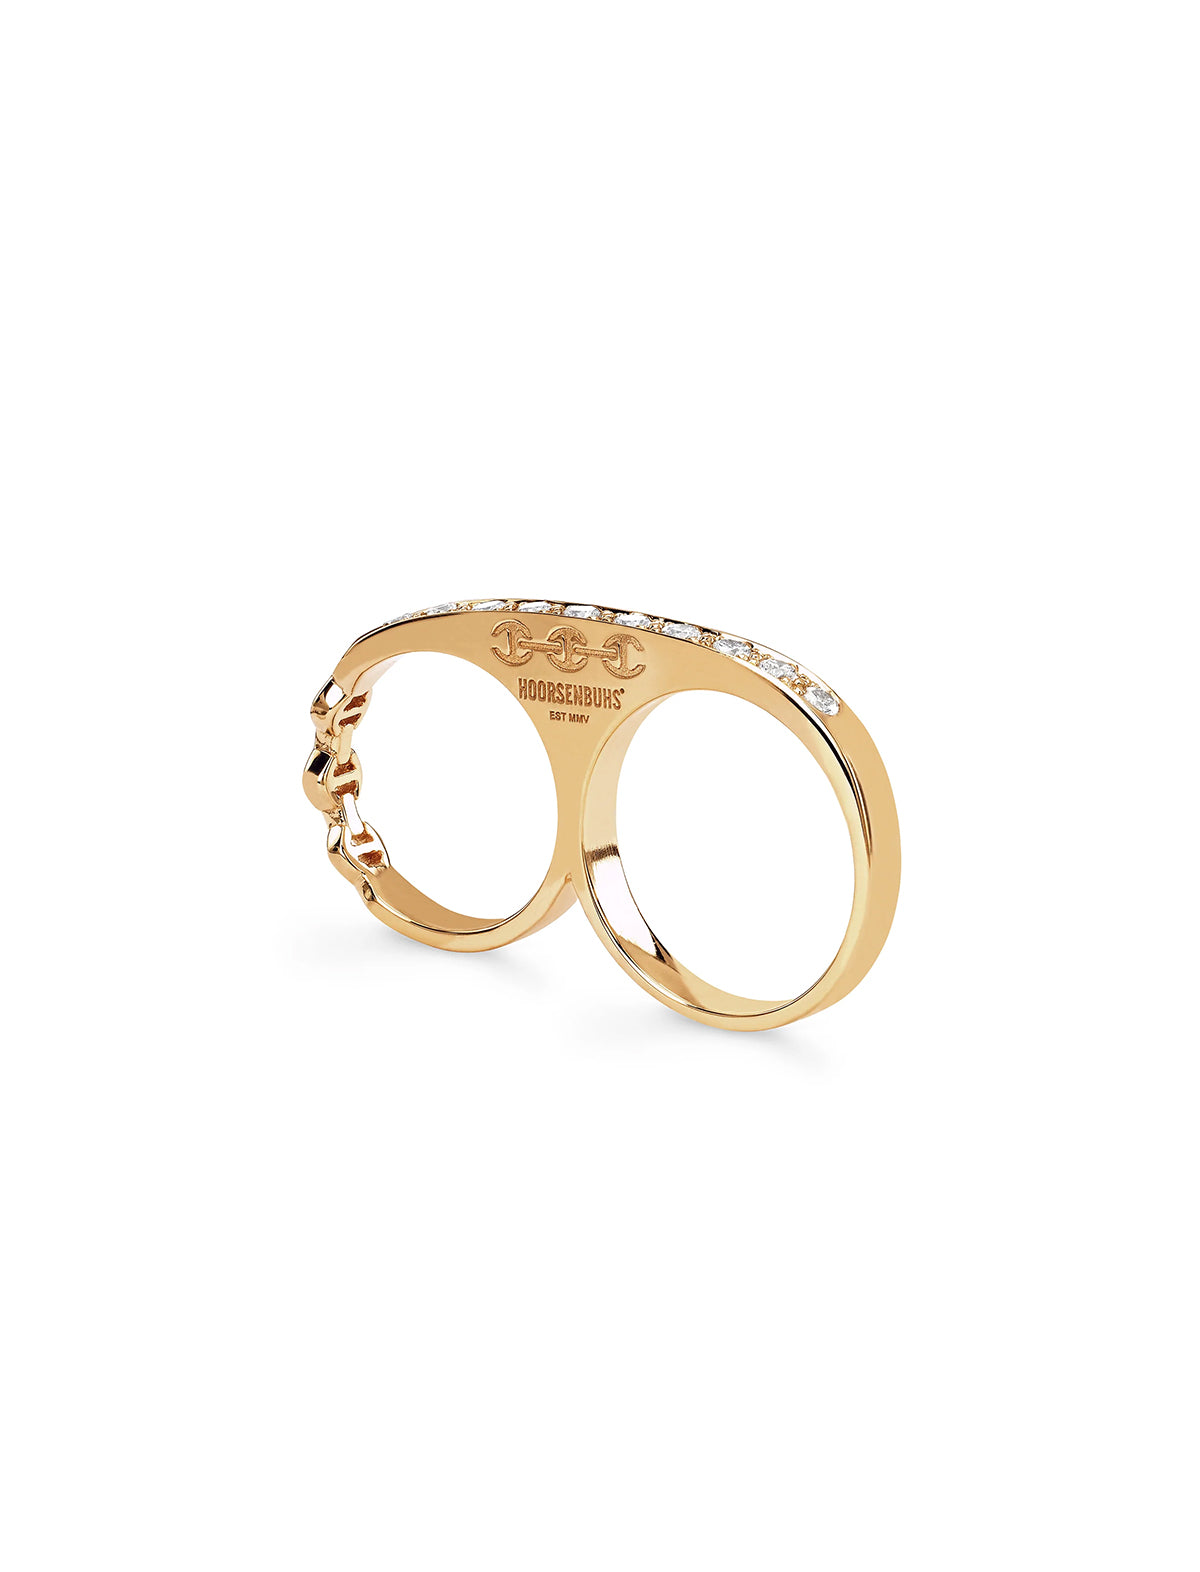 HOORSENBUHS Double Knuckle with Diamonds Ring 18k Yellow Gold